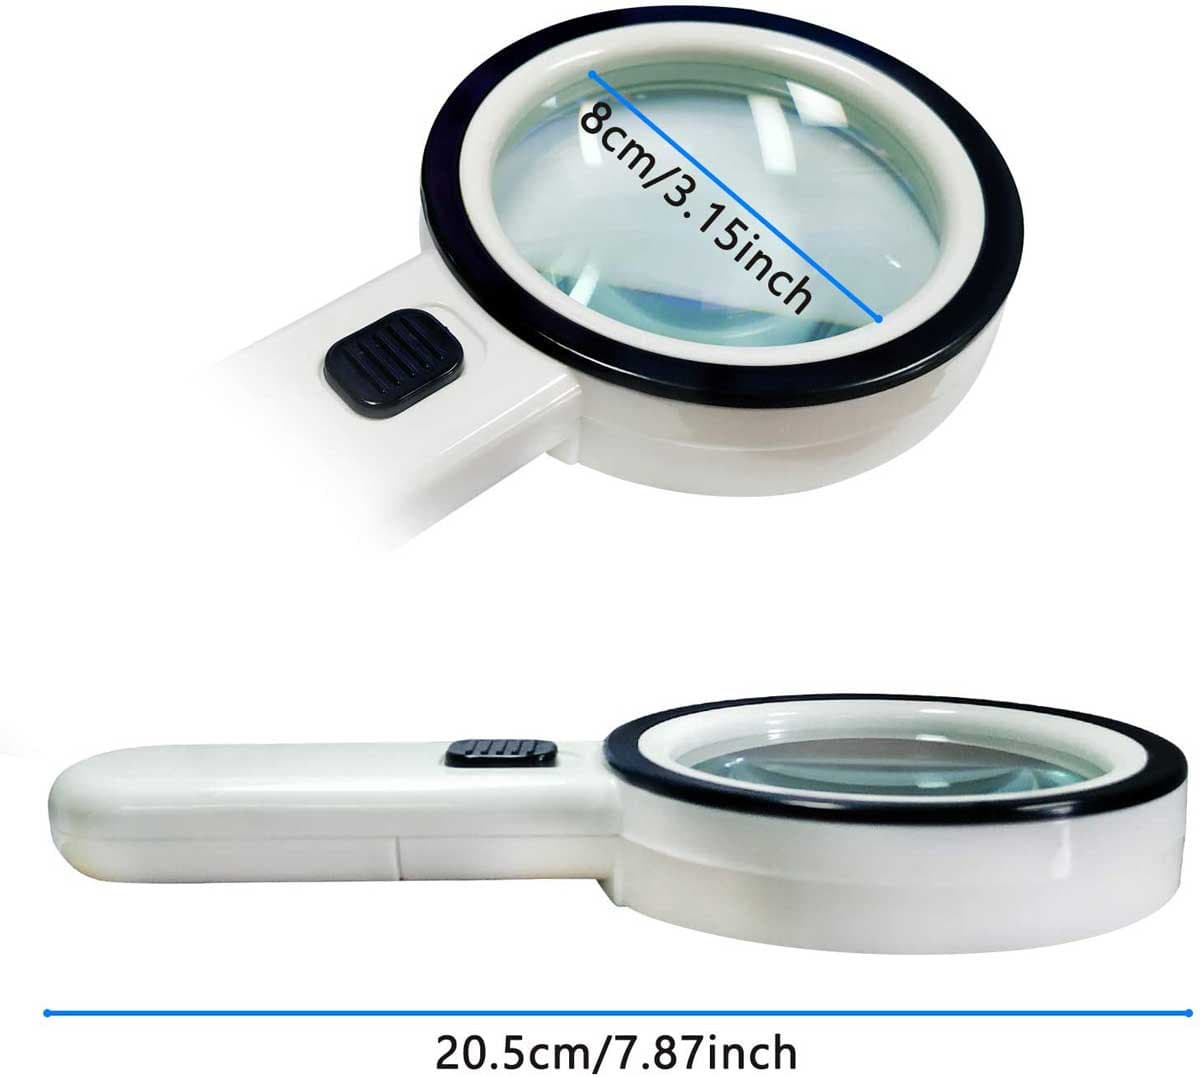 30X Professional Magnifying Glass With LED Light Double Llayer